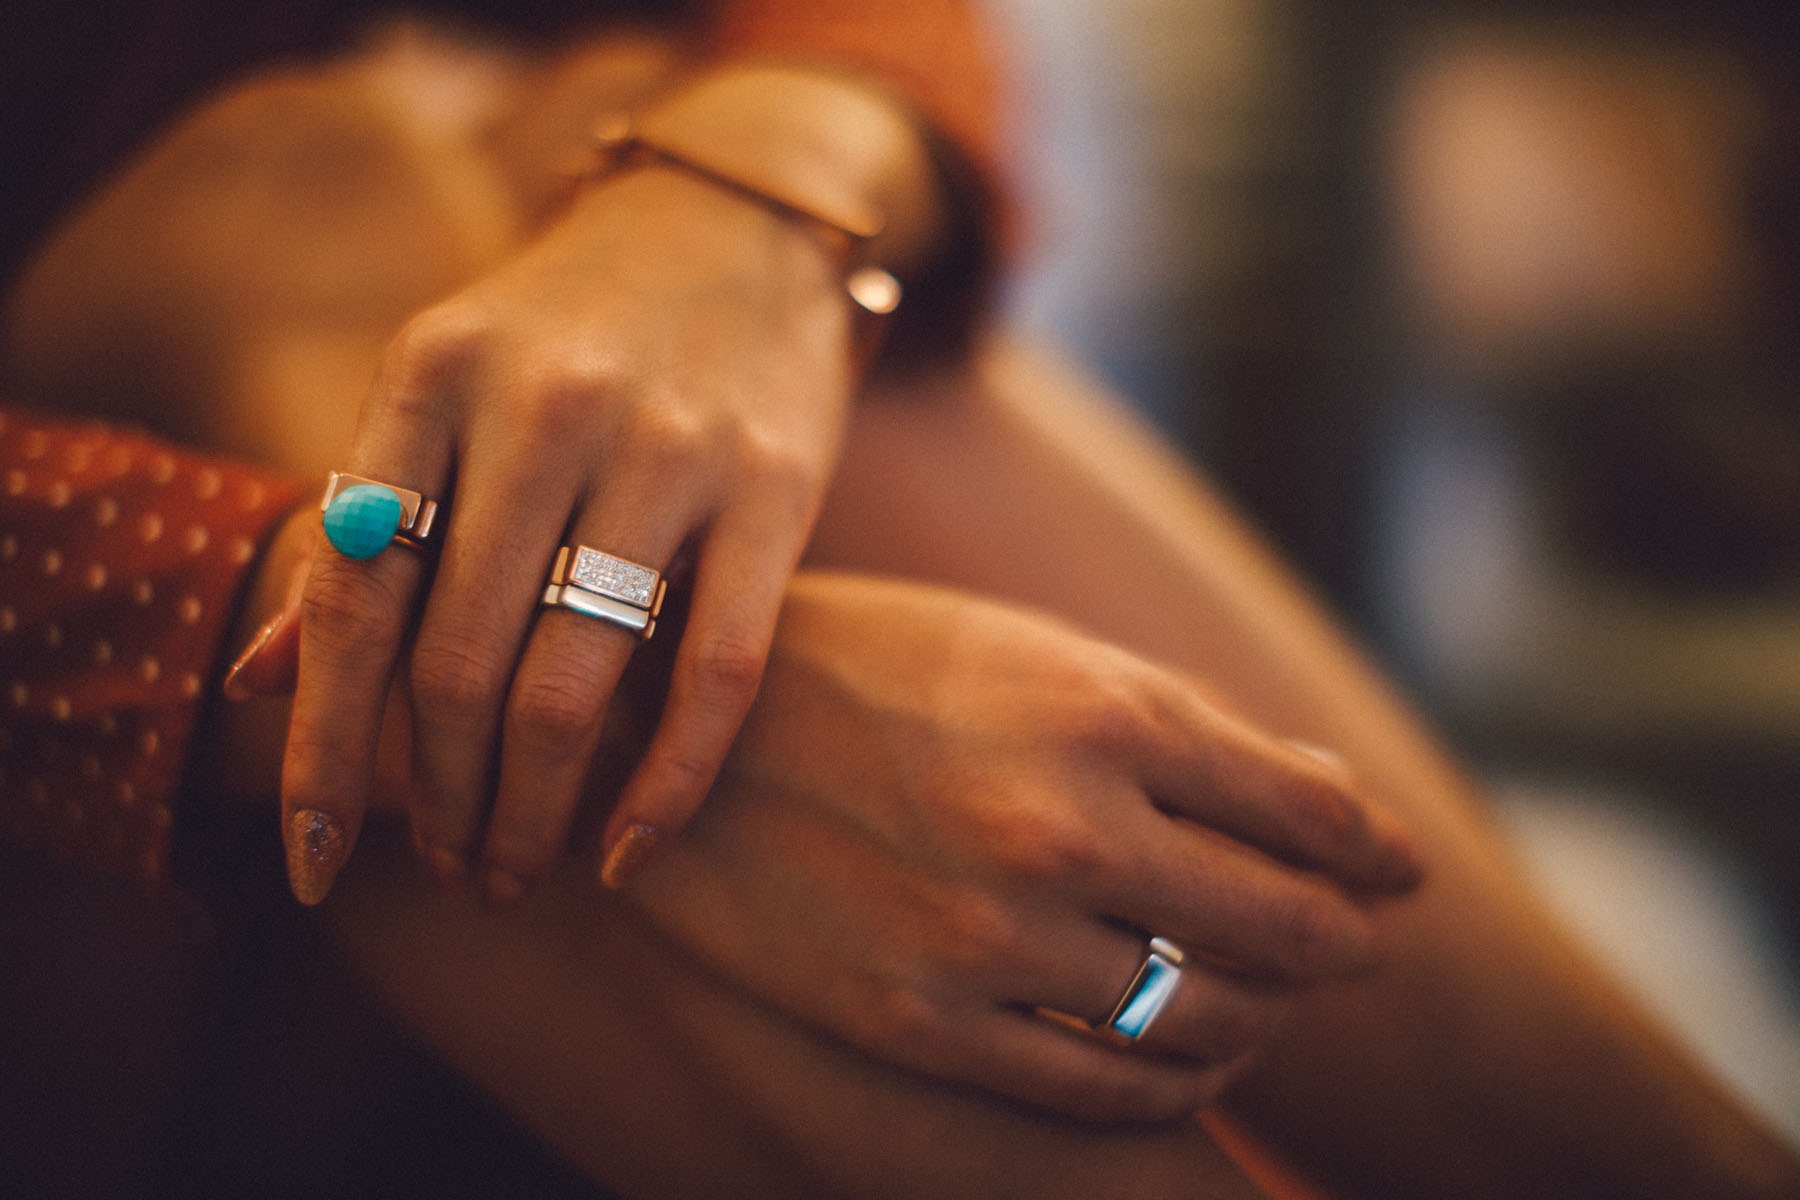 Date Night Jewelry with Monica Vinader Signature Thin Rings and Stone Ring // Notjessfashion.com